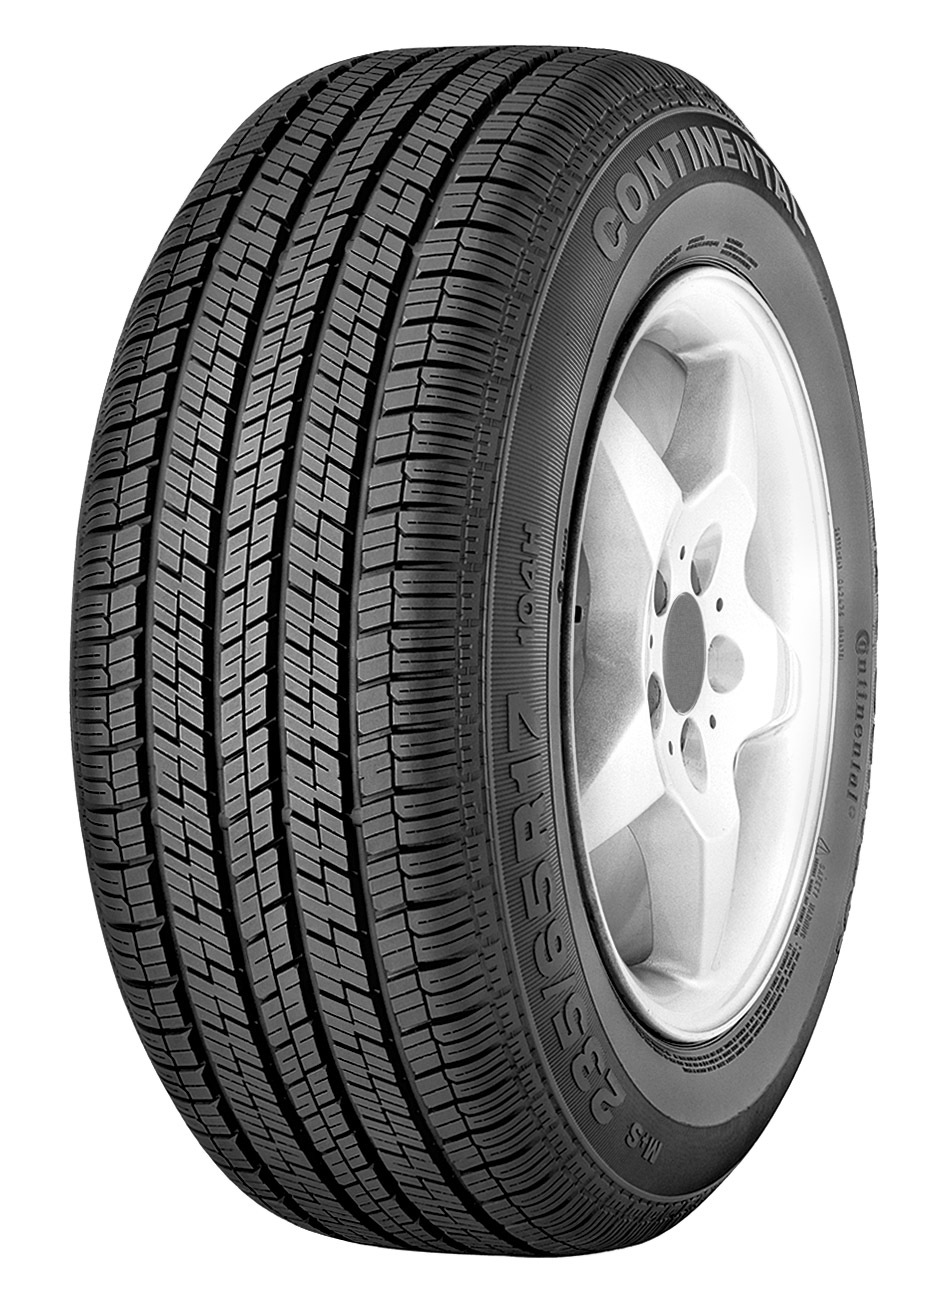 255/60 R 17 106H 4X4CONTACT m+s TL